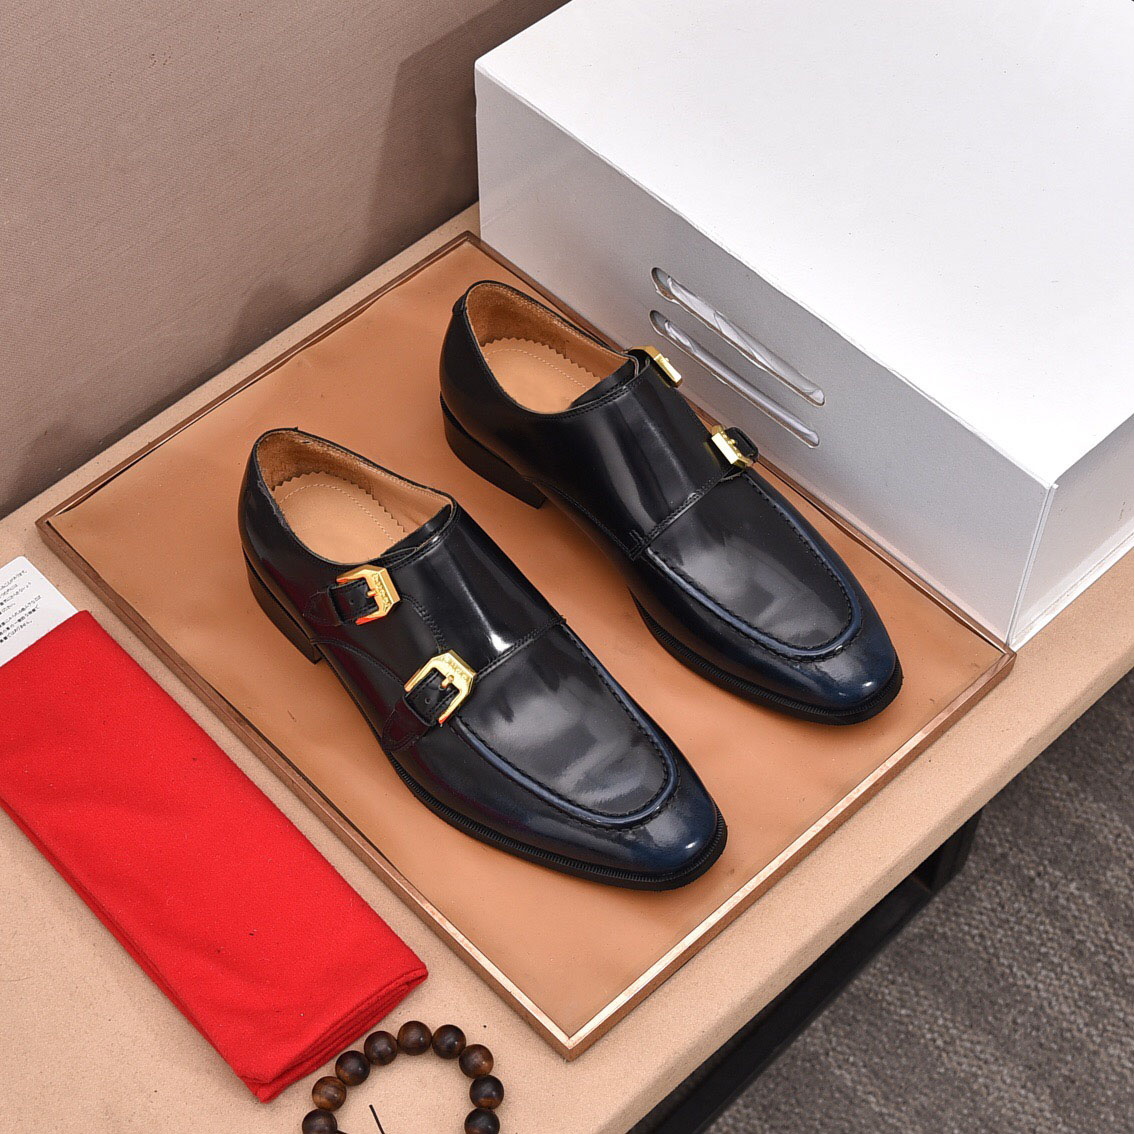 2023 Men Dress Shoes Fashion Handmade Pointed Toe Flats Casual Genuine Leather Breathable Oxfords Brand Party Wedding Groom Shoes Size 38-46